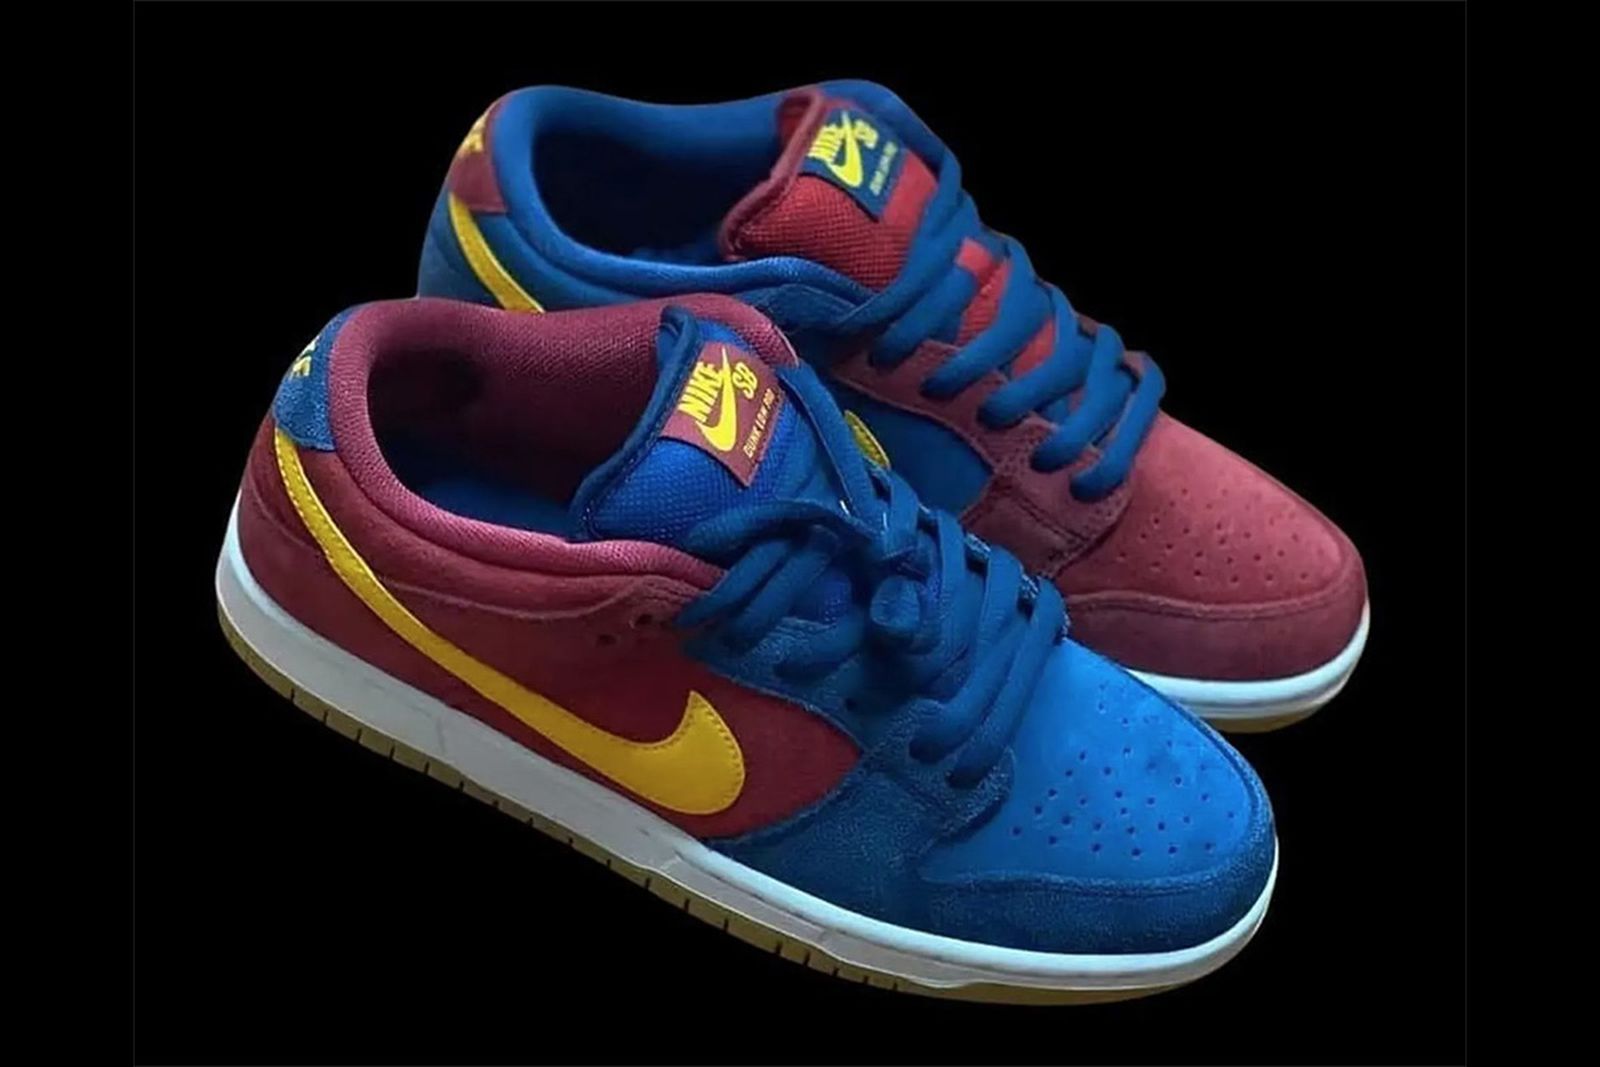 SB Dunk Low & Other Sneakers Worth a